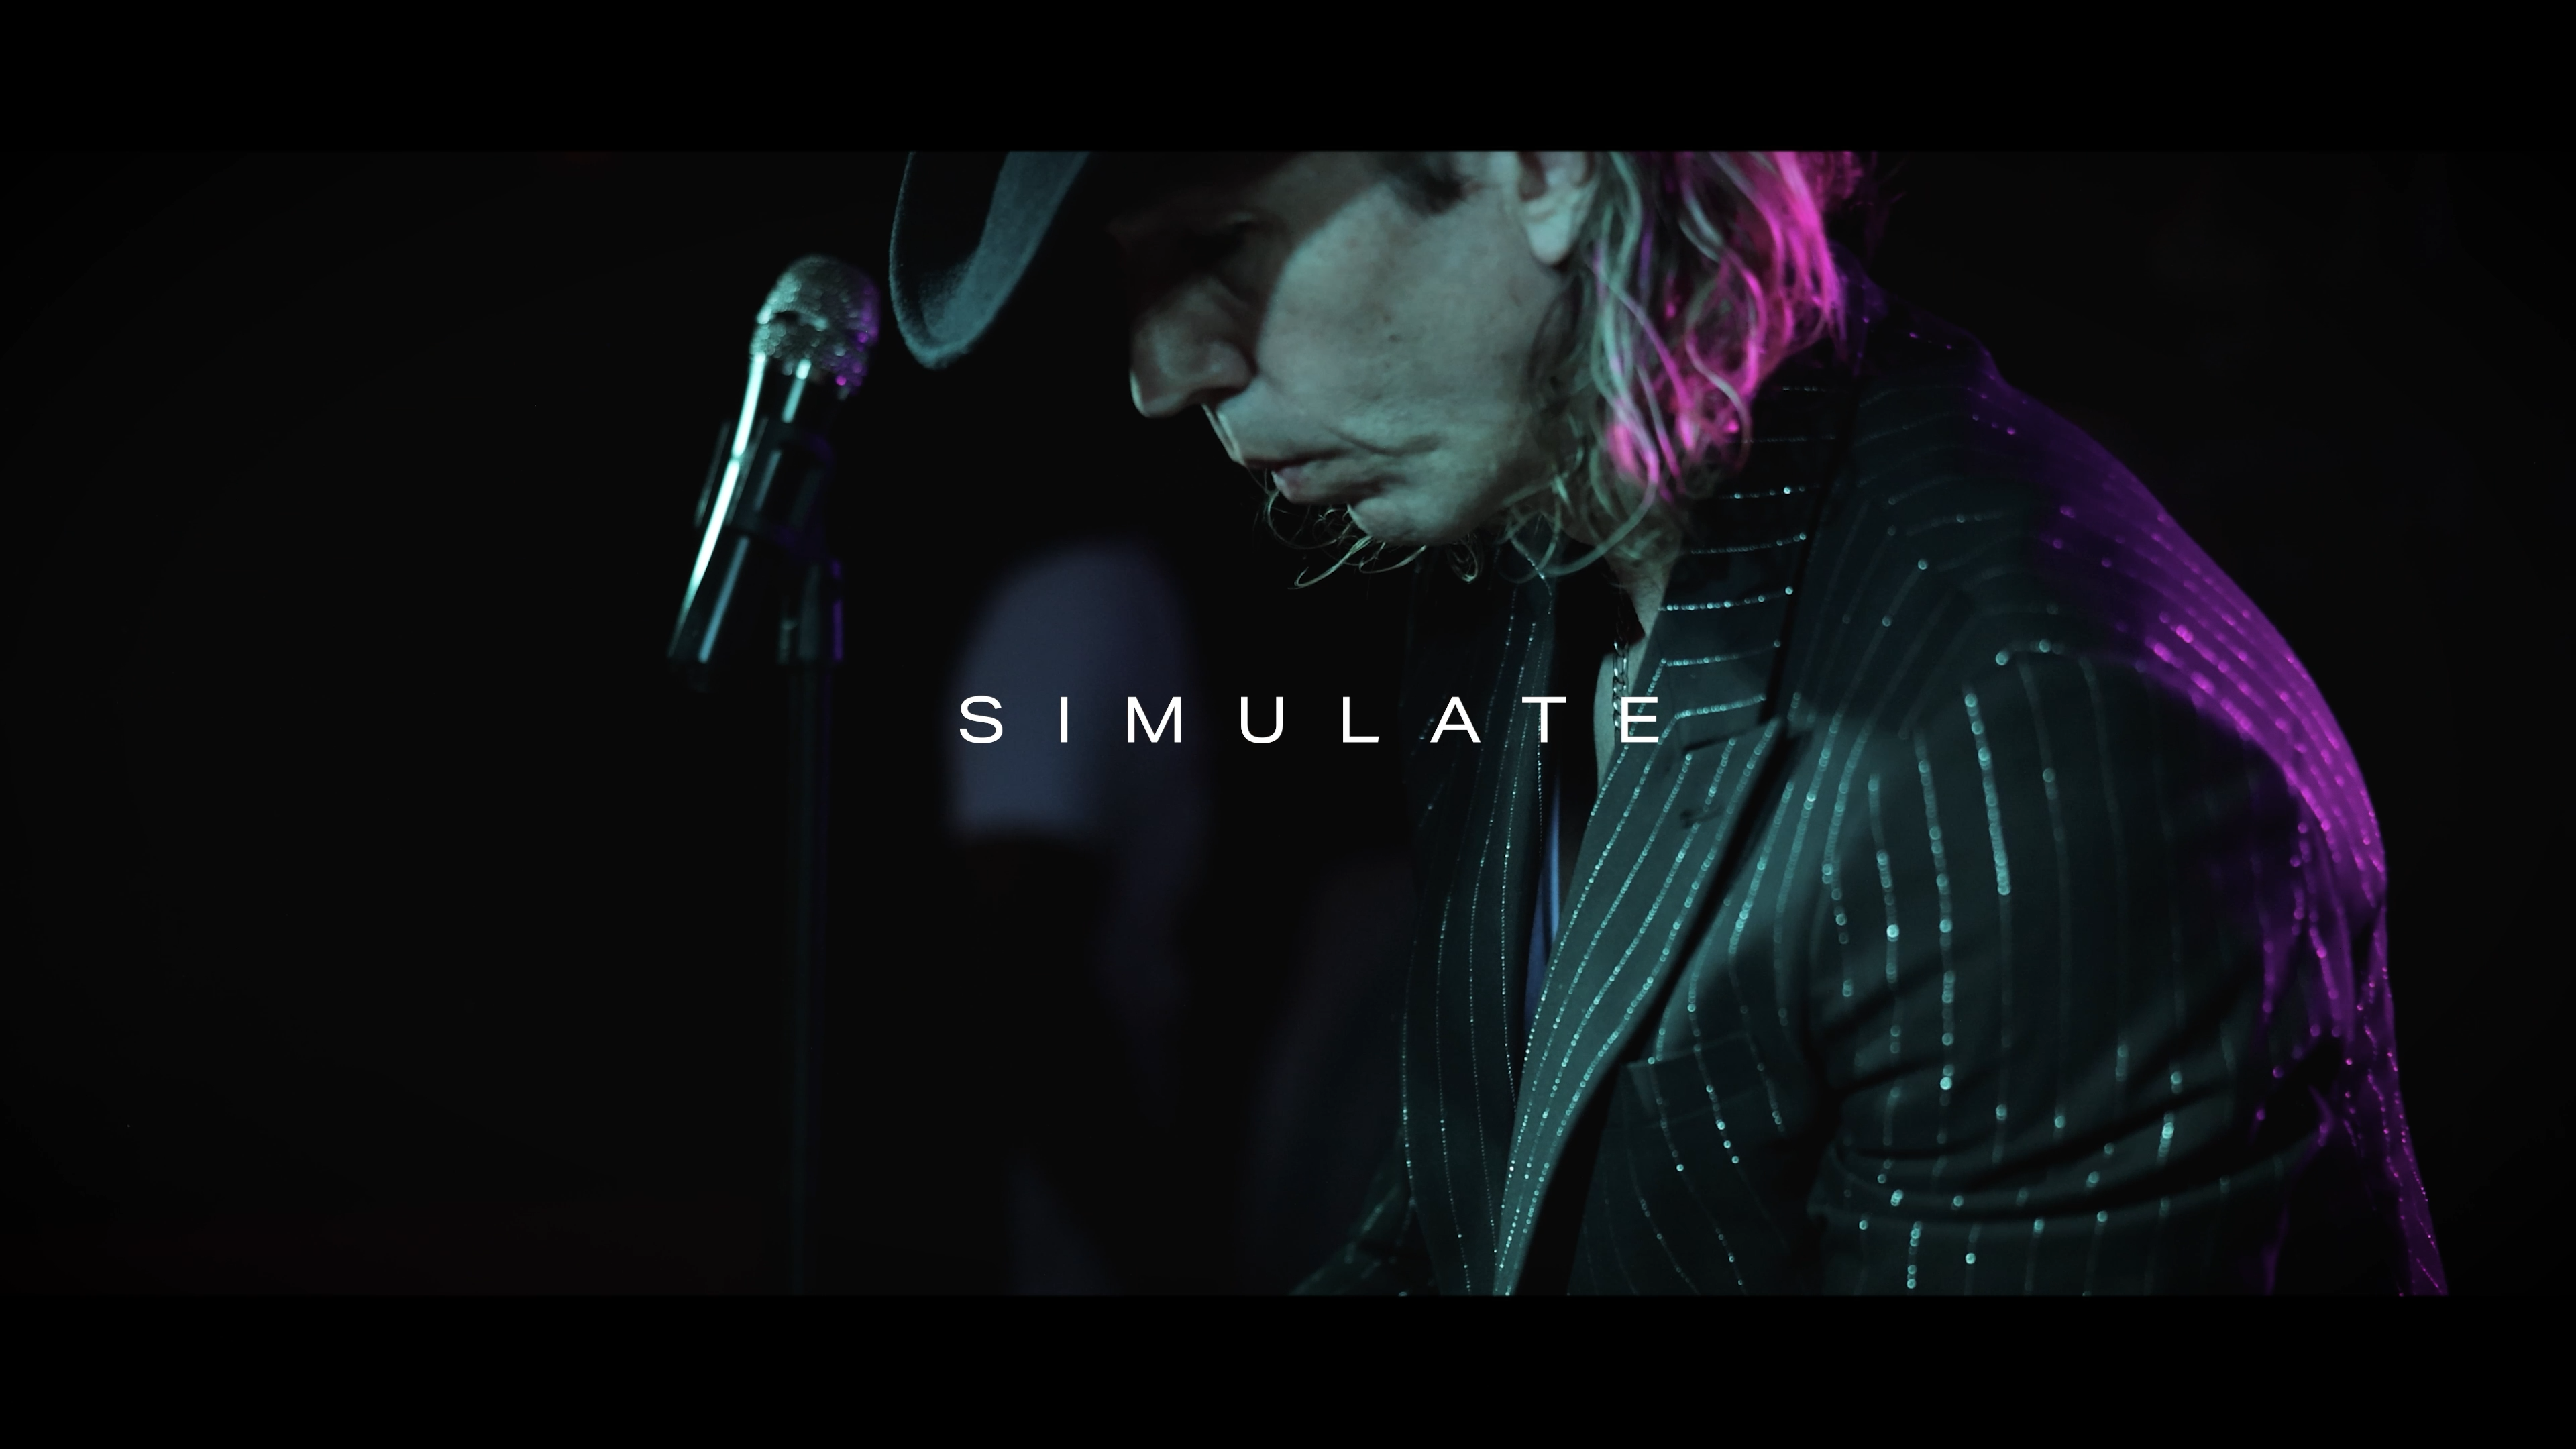 Indiana Bradley Returns in the Raucous Video for his New Wave Punk Single “Simulate”